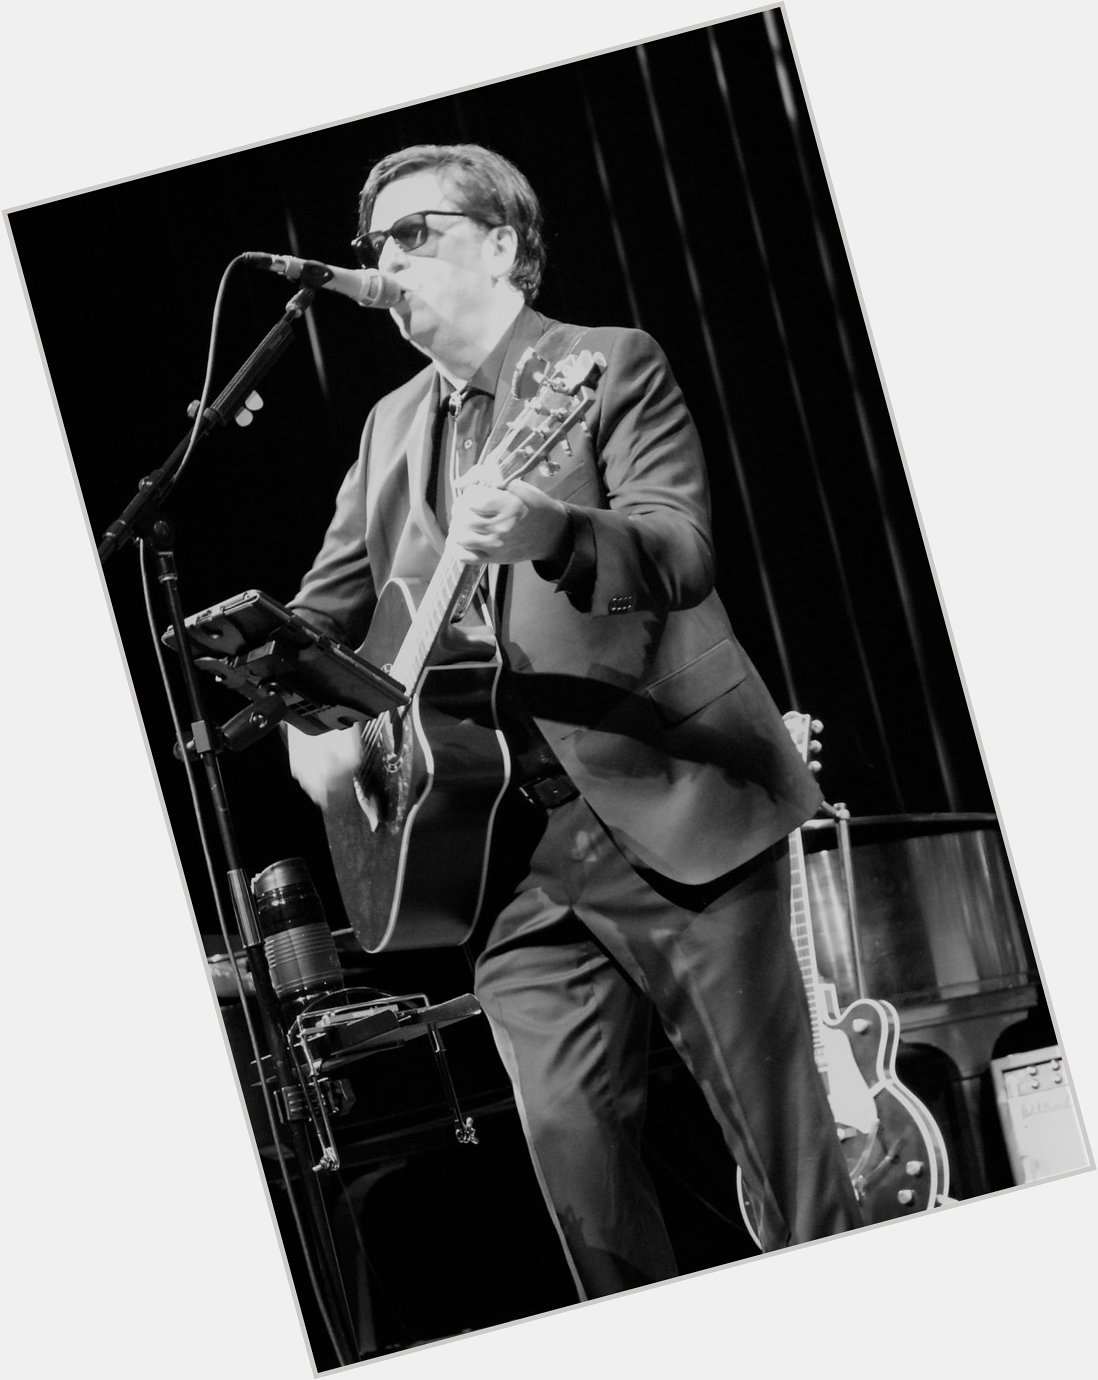 Happy Birthday Mike Demers of the Roy Orbison tribute band the Lonely 